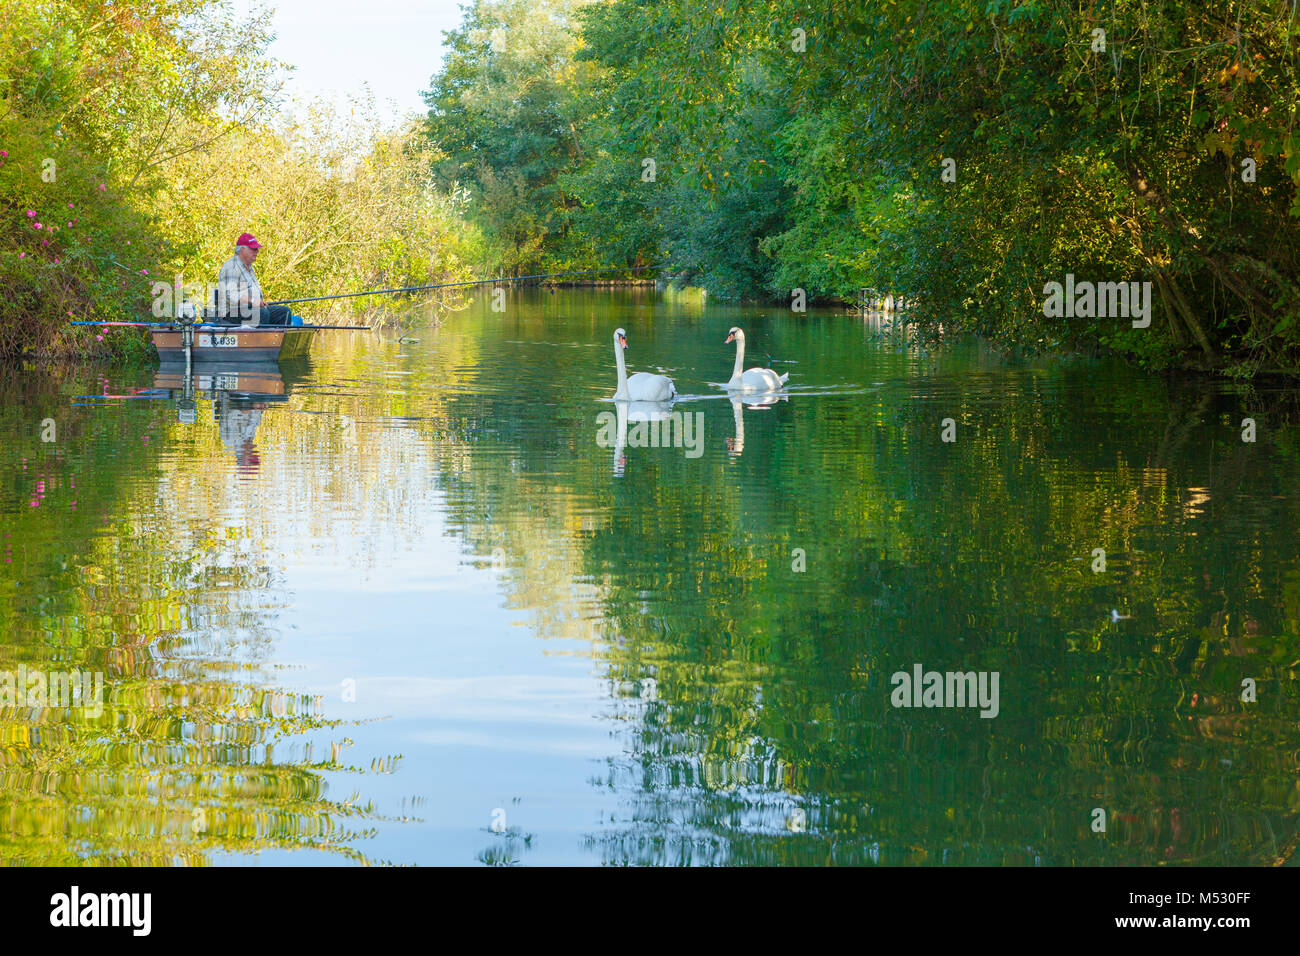 Amiens France fisherman and swans in a canal Stock Photo